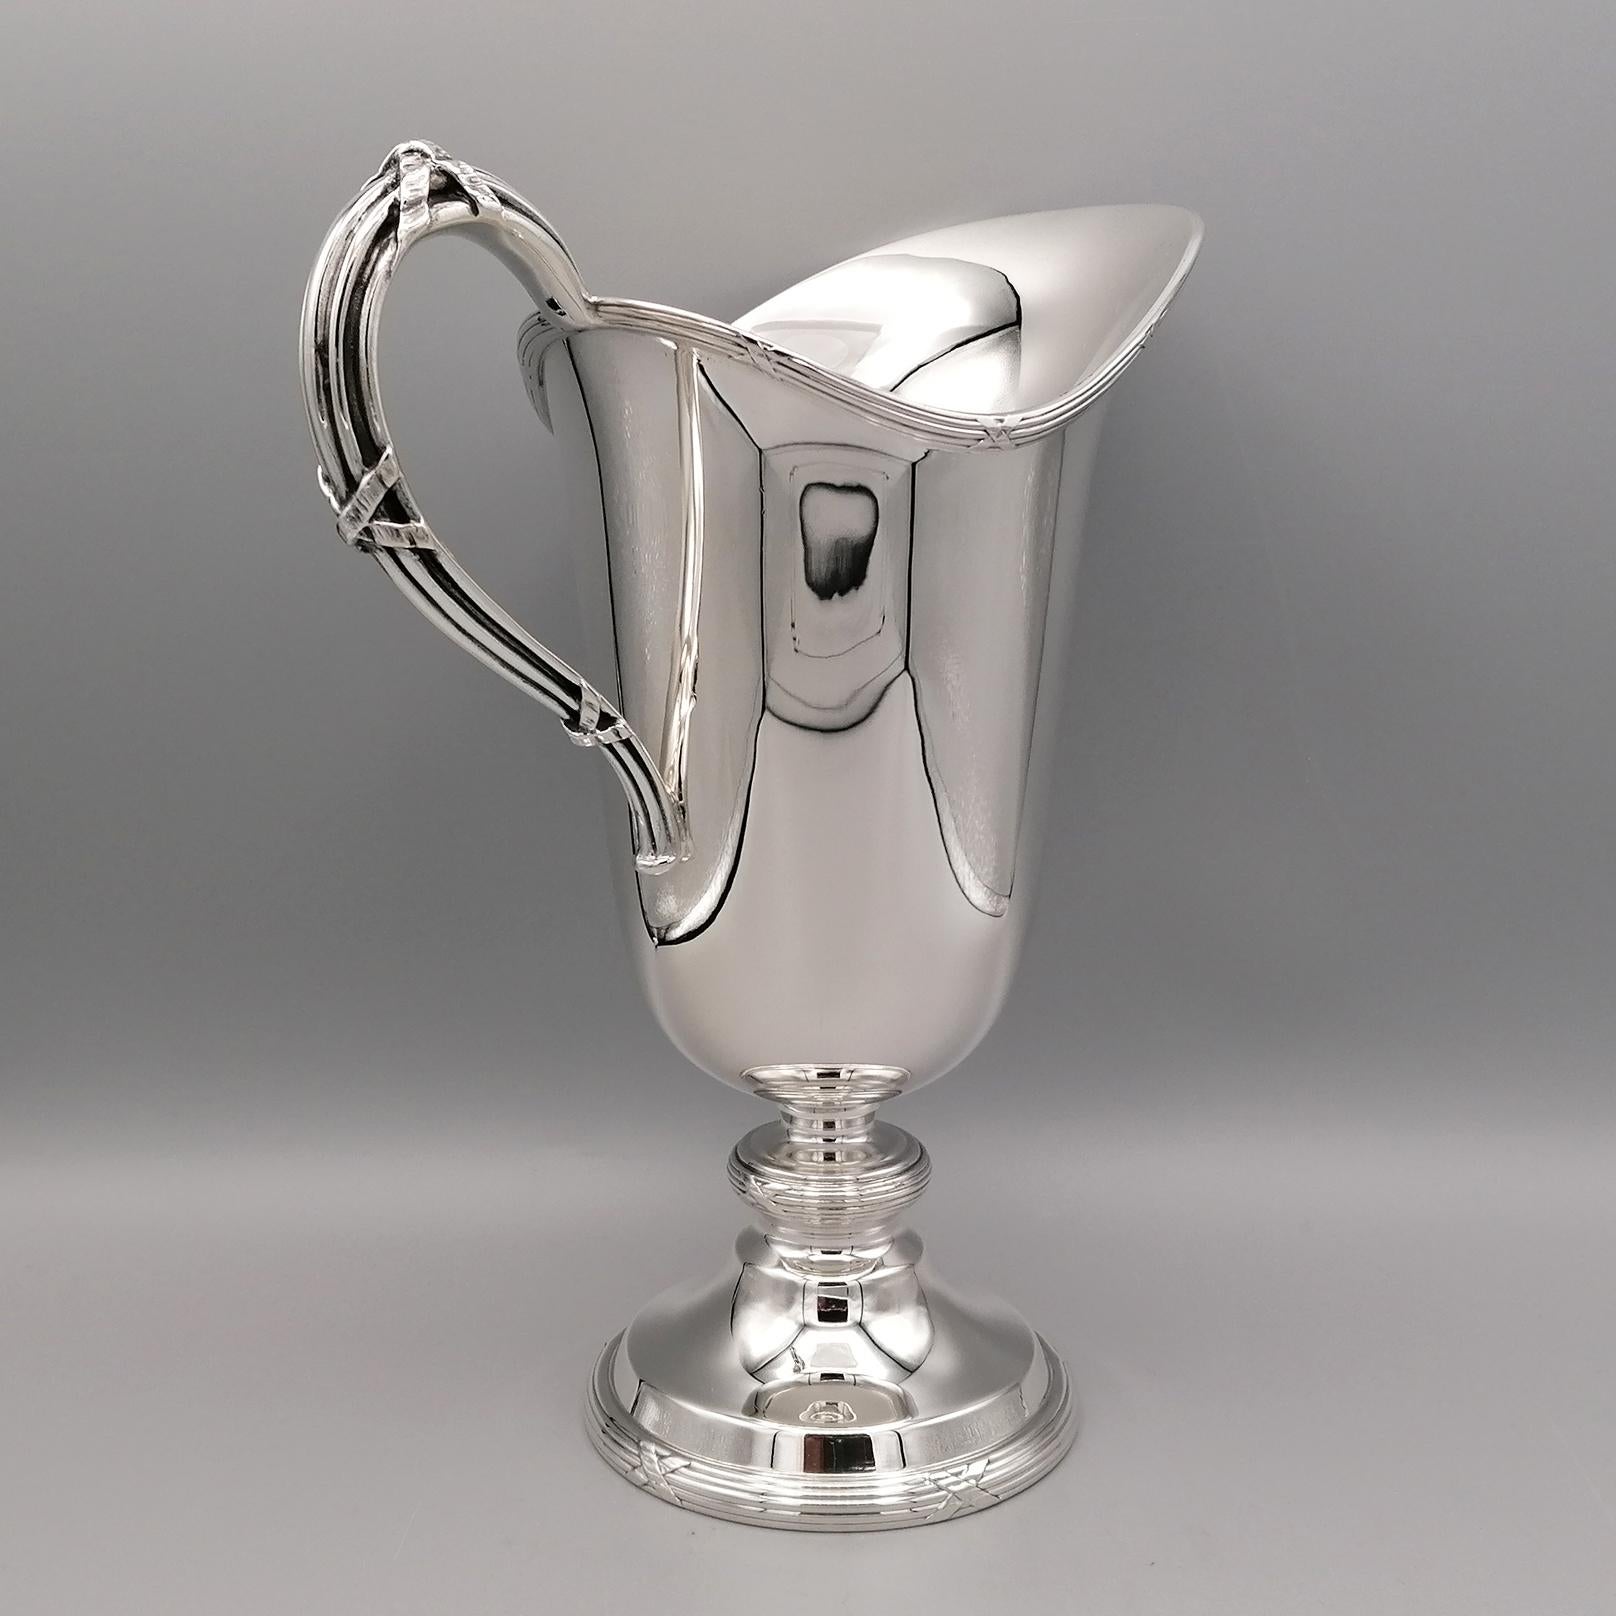 21st Century Italian Buccellati Sterling Silver Pitcher For Sale 1